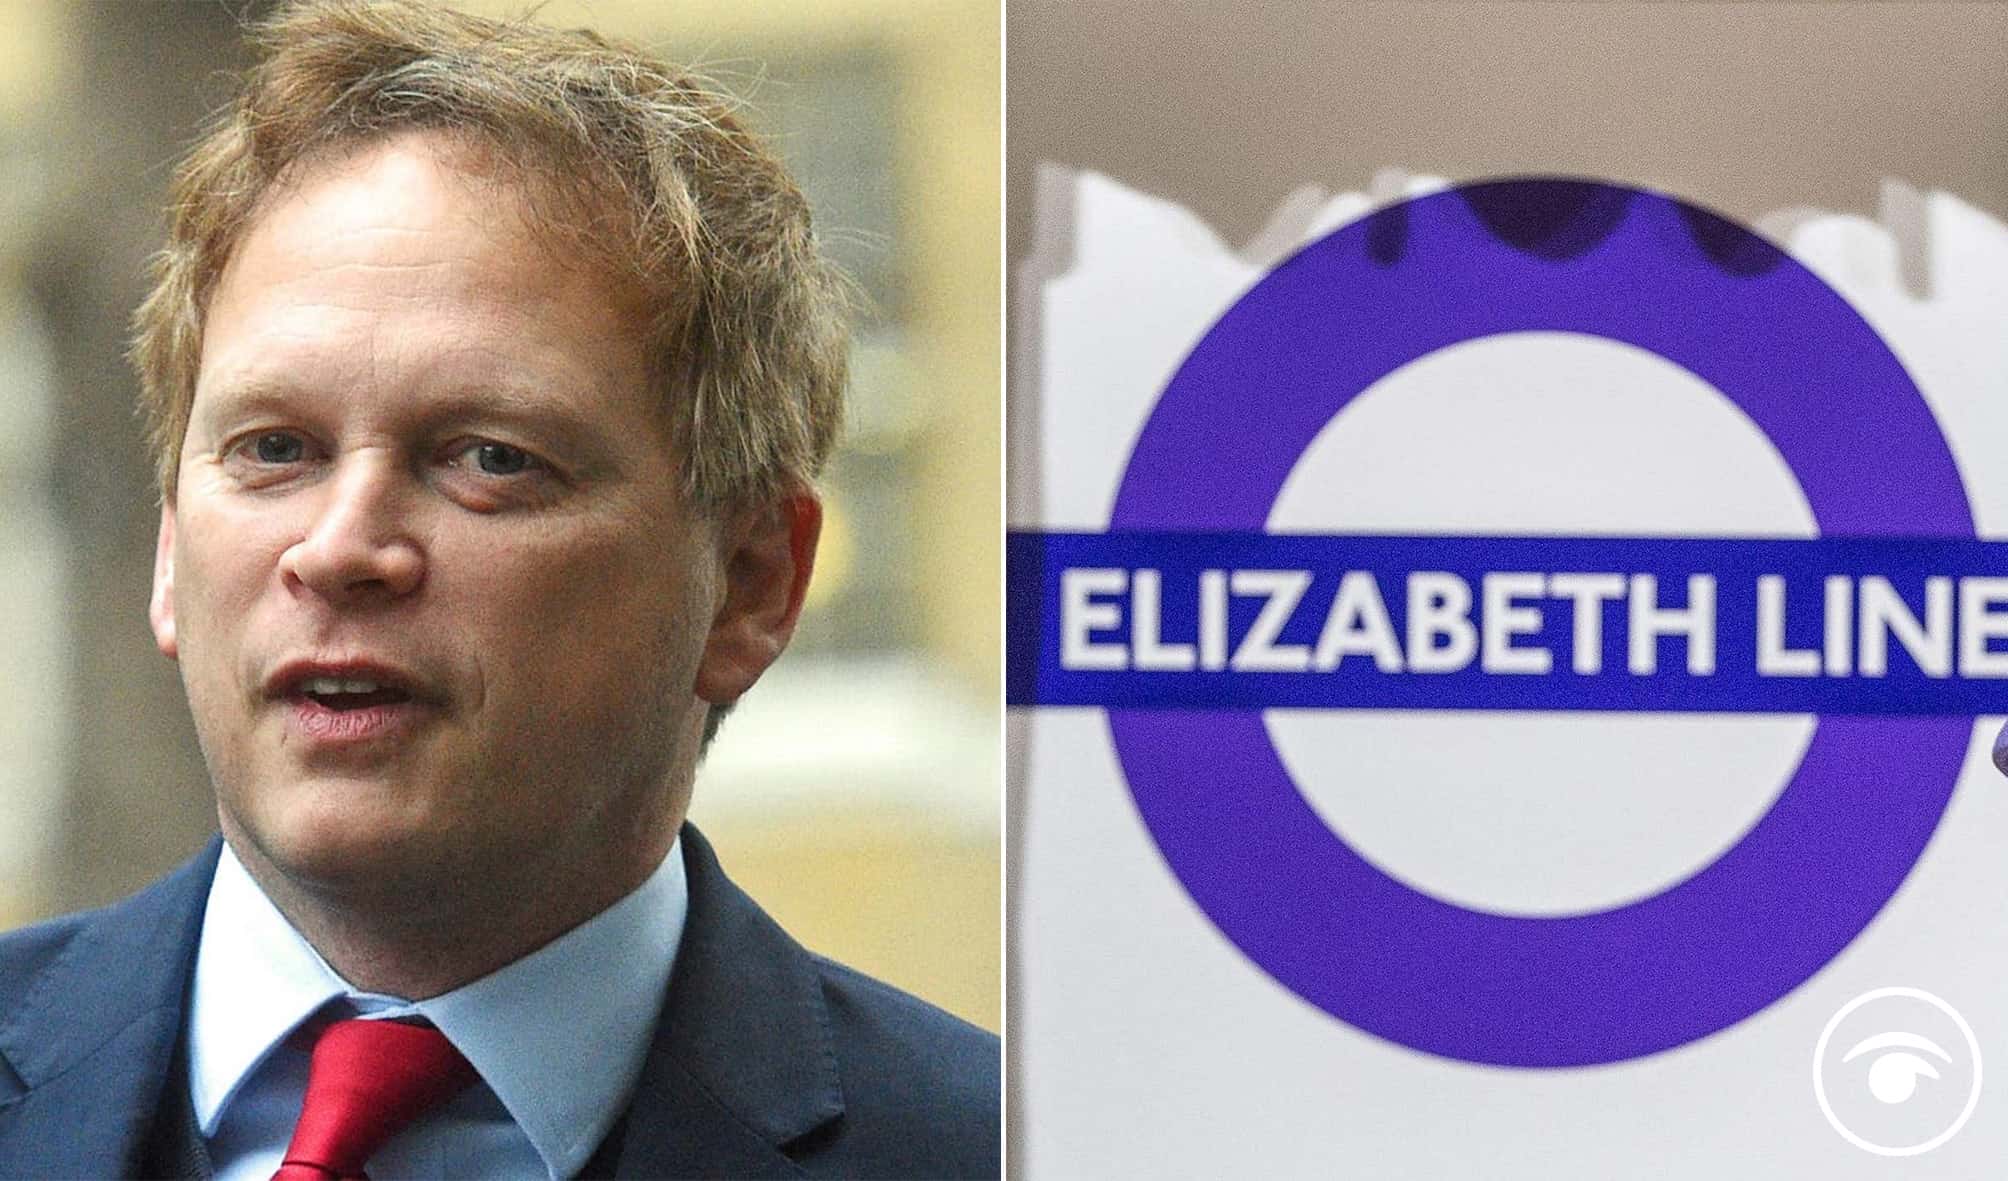 Grant Shapps accuses Sadiq Khan of breaking election rules and people aren’t having it